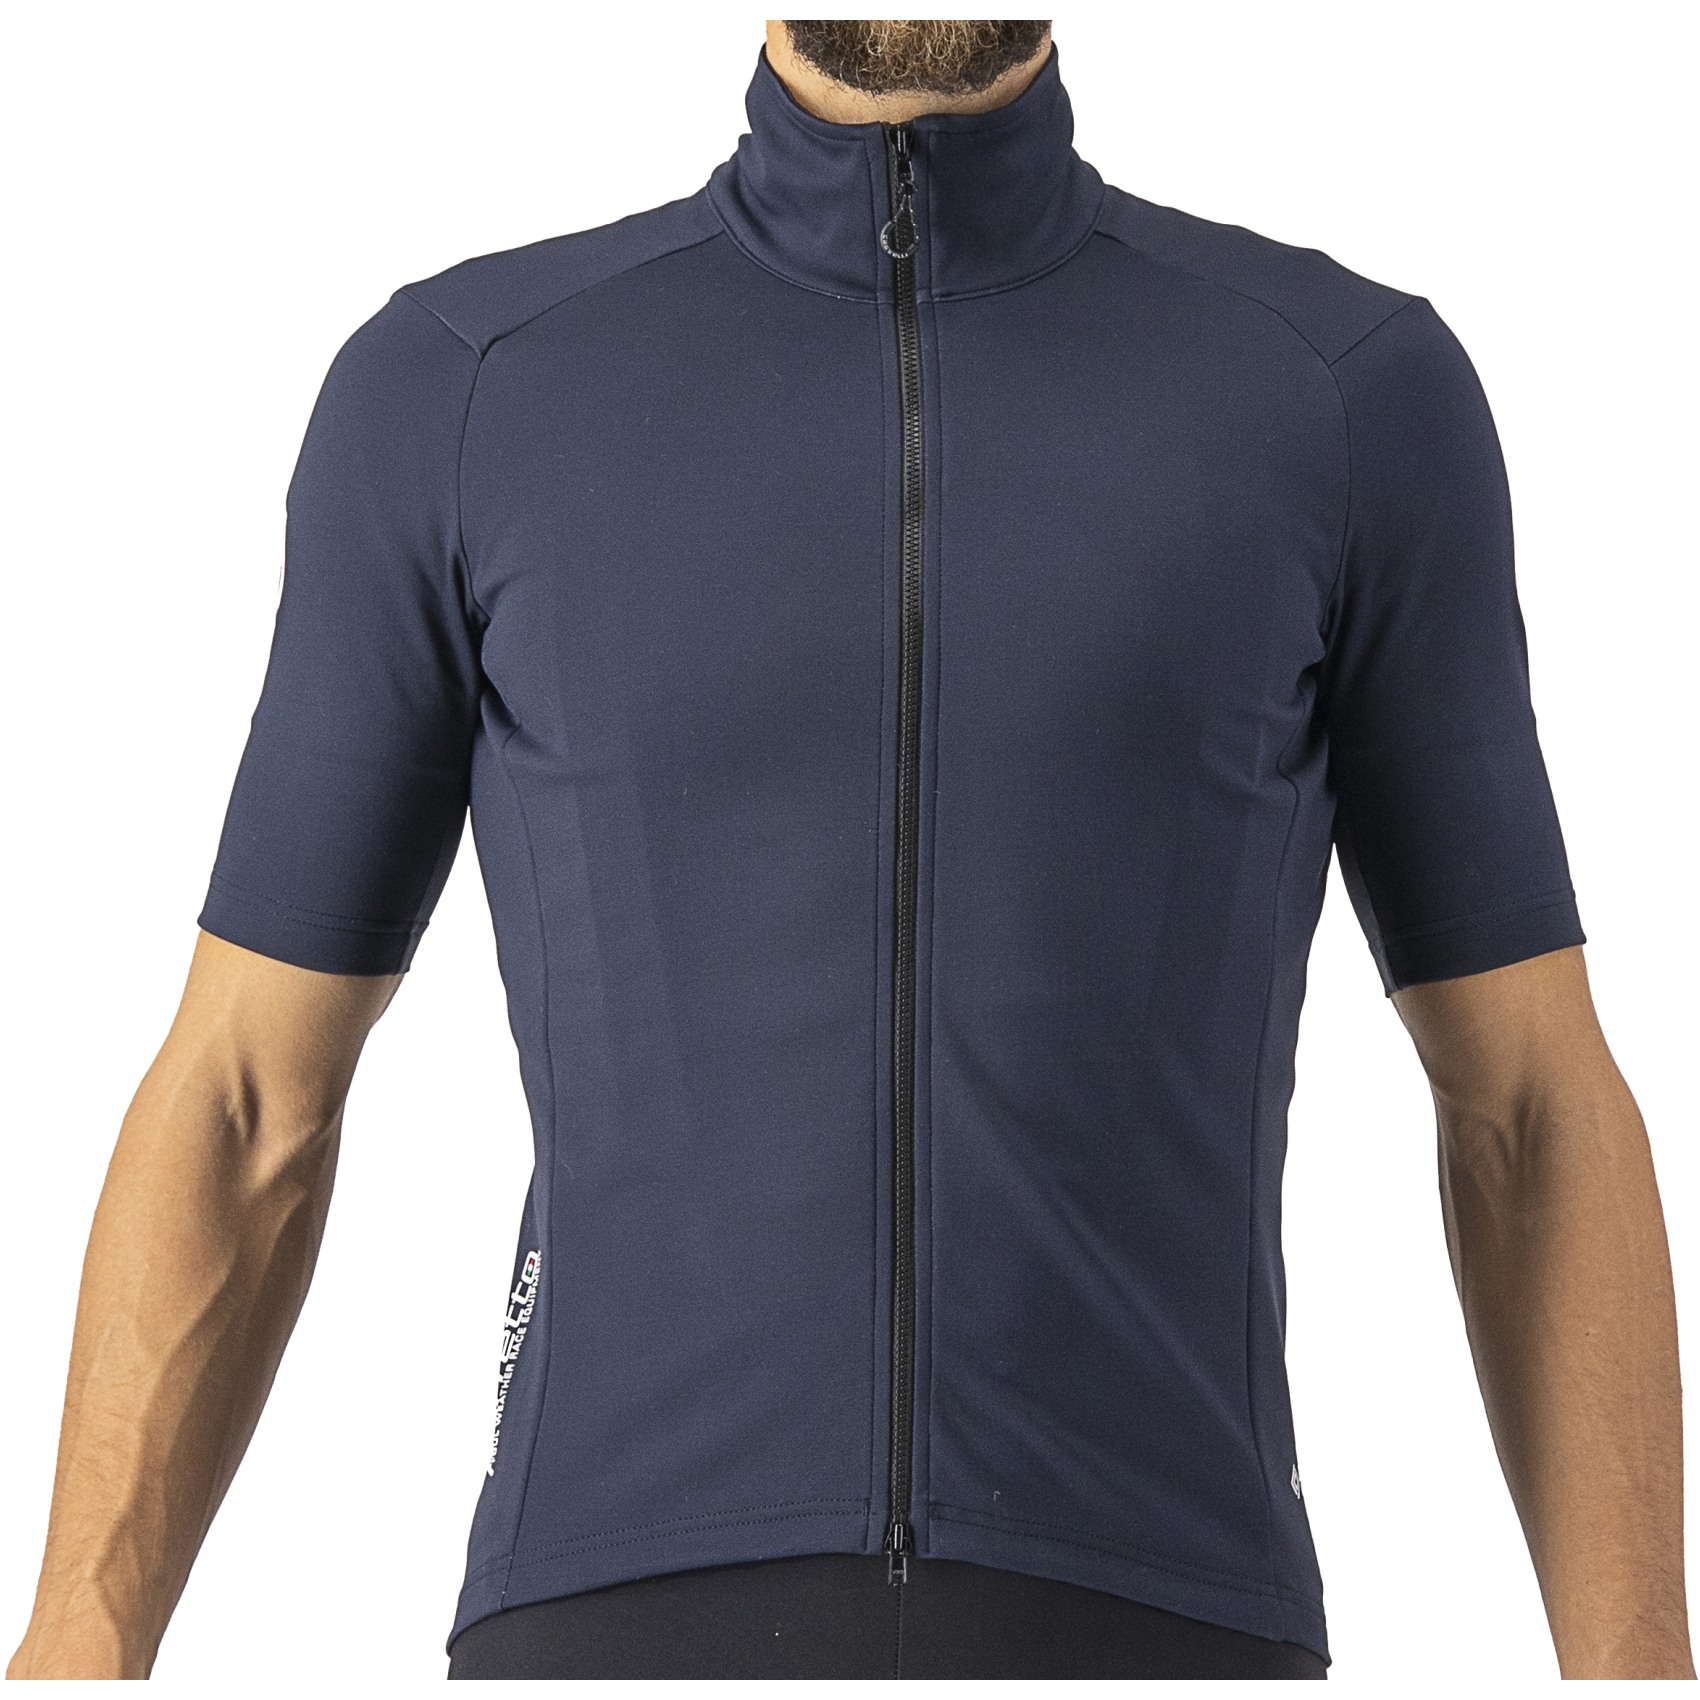 Picture of Castelli Perfetto RoS 2 Wind Jersey Men - belgian blue 424